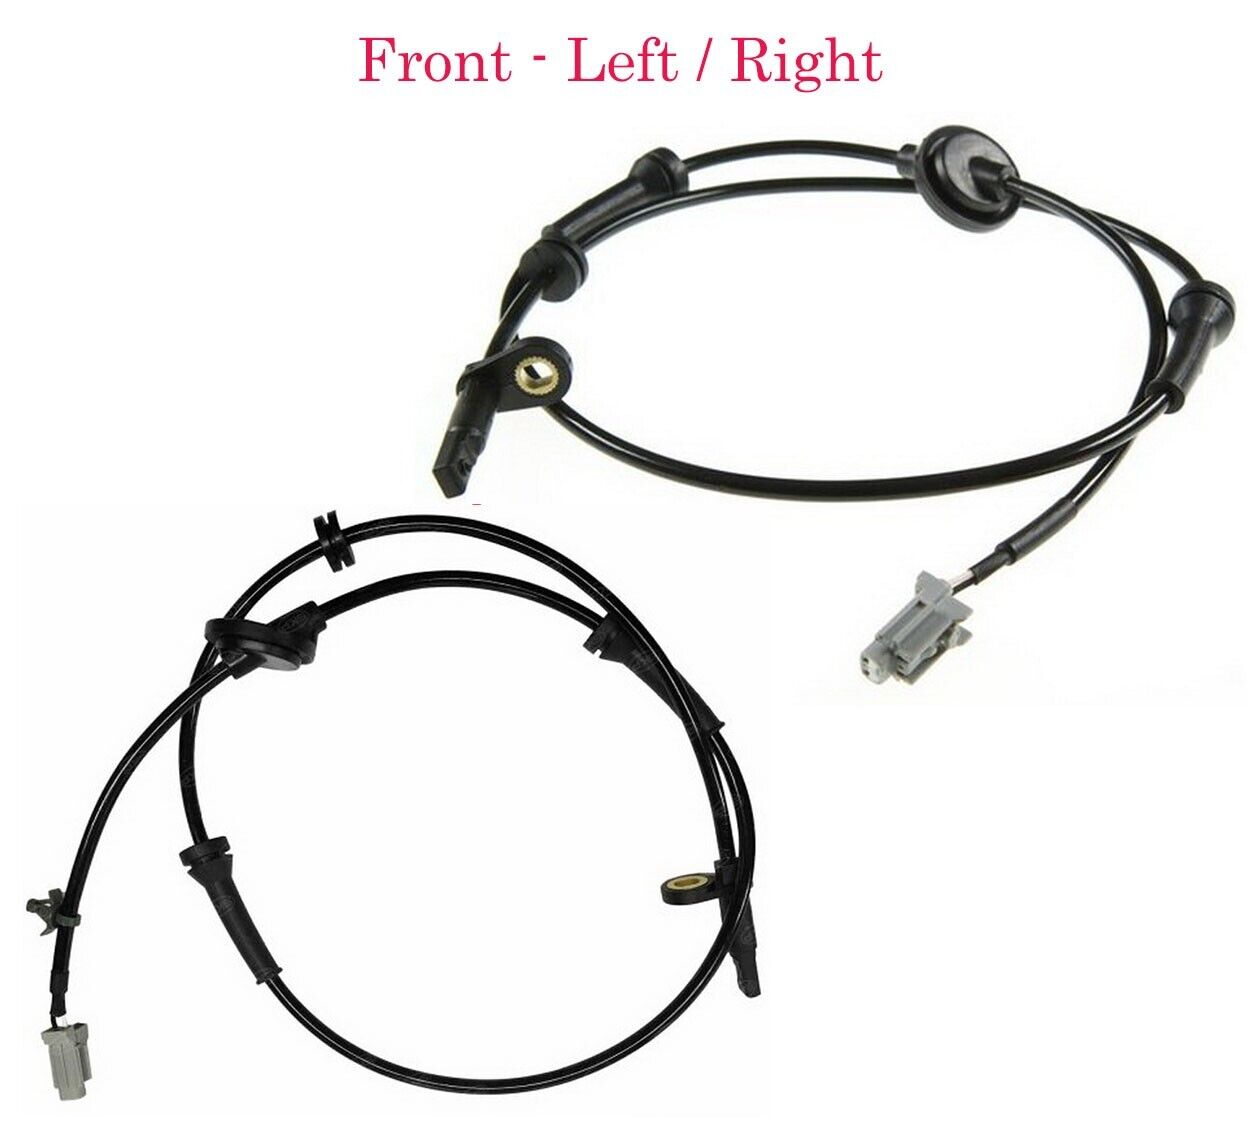 Set of 2 ABS Wheel Speed Sensor Front Left & Right Fits: Nissan Quest 2006-2009